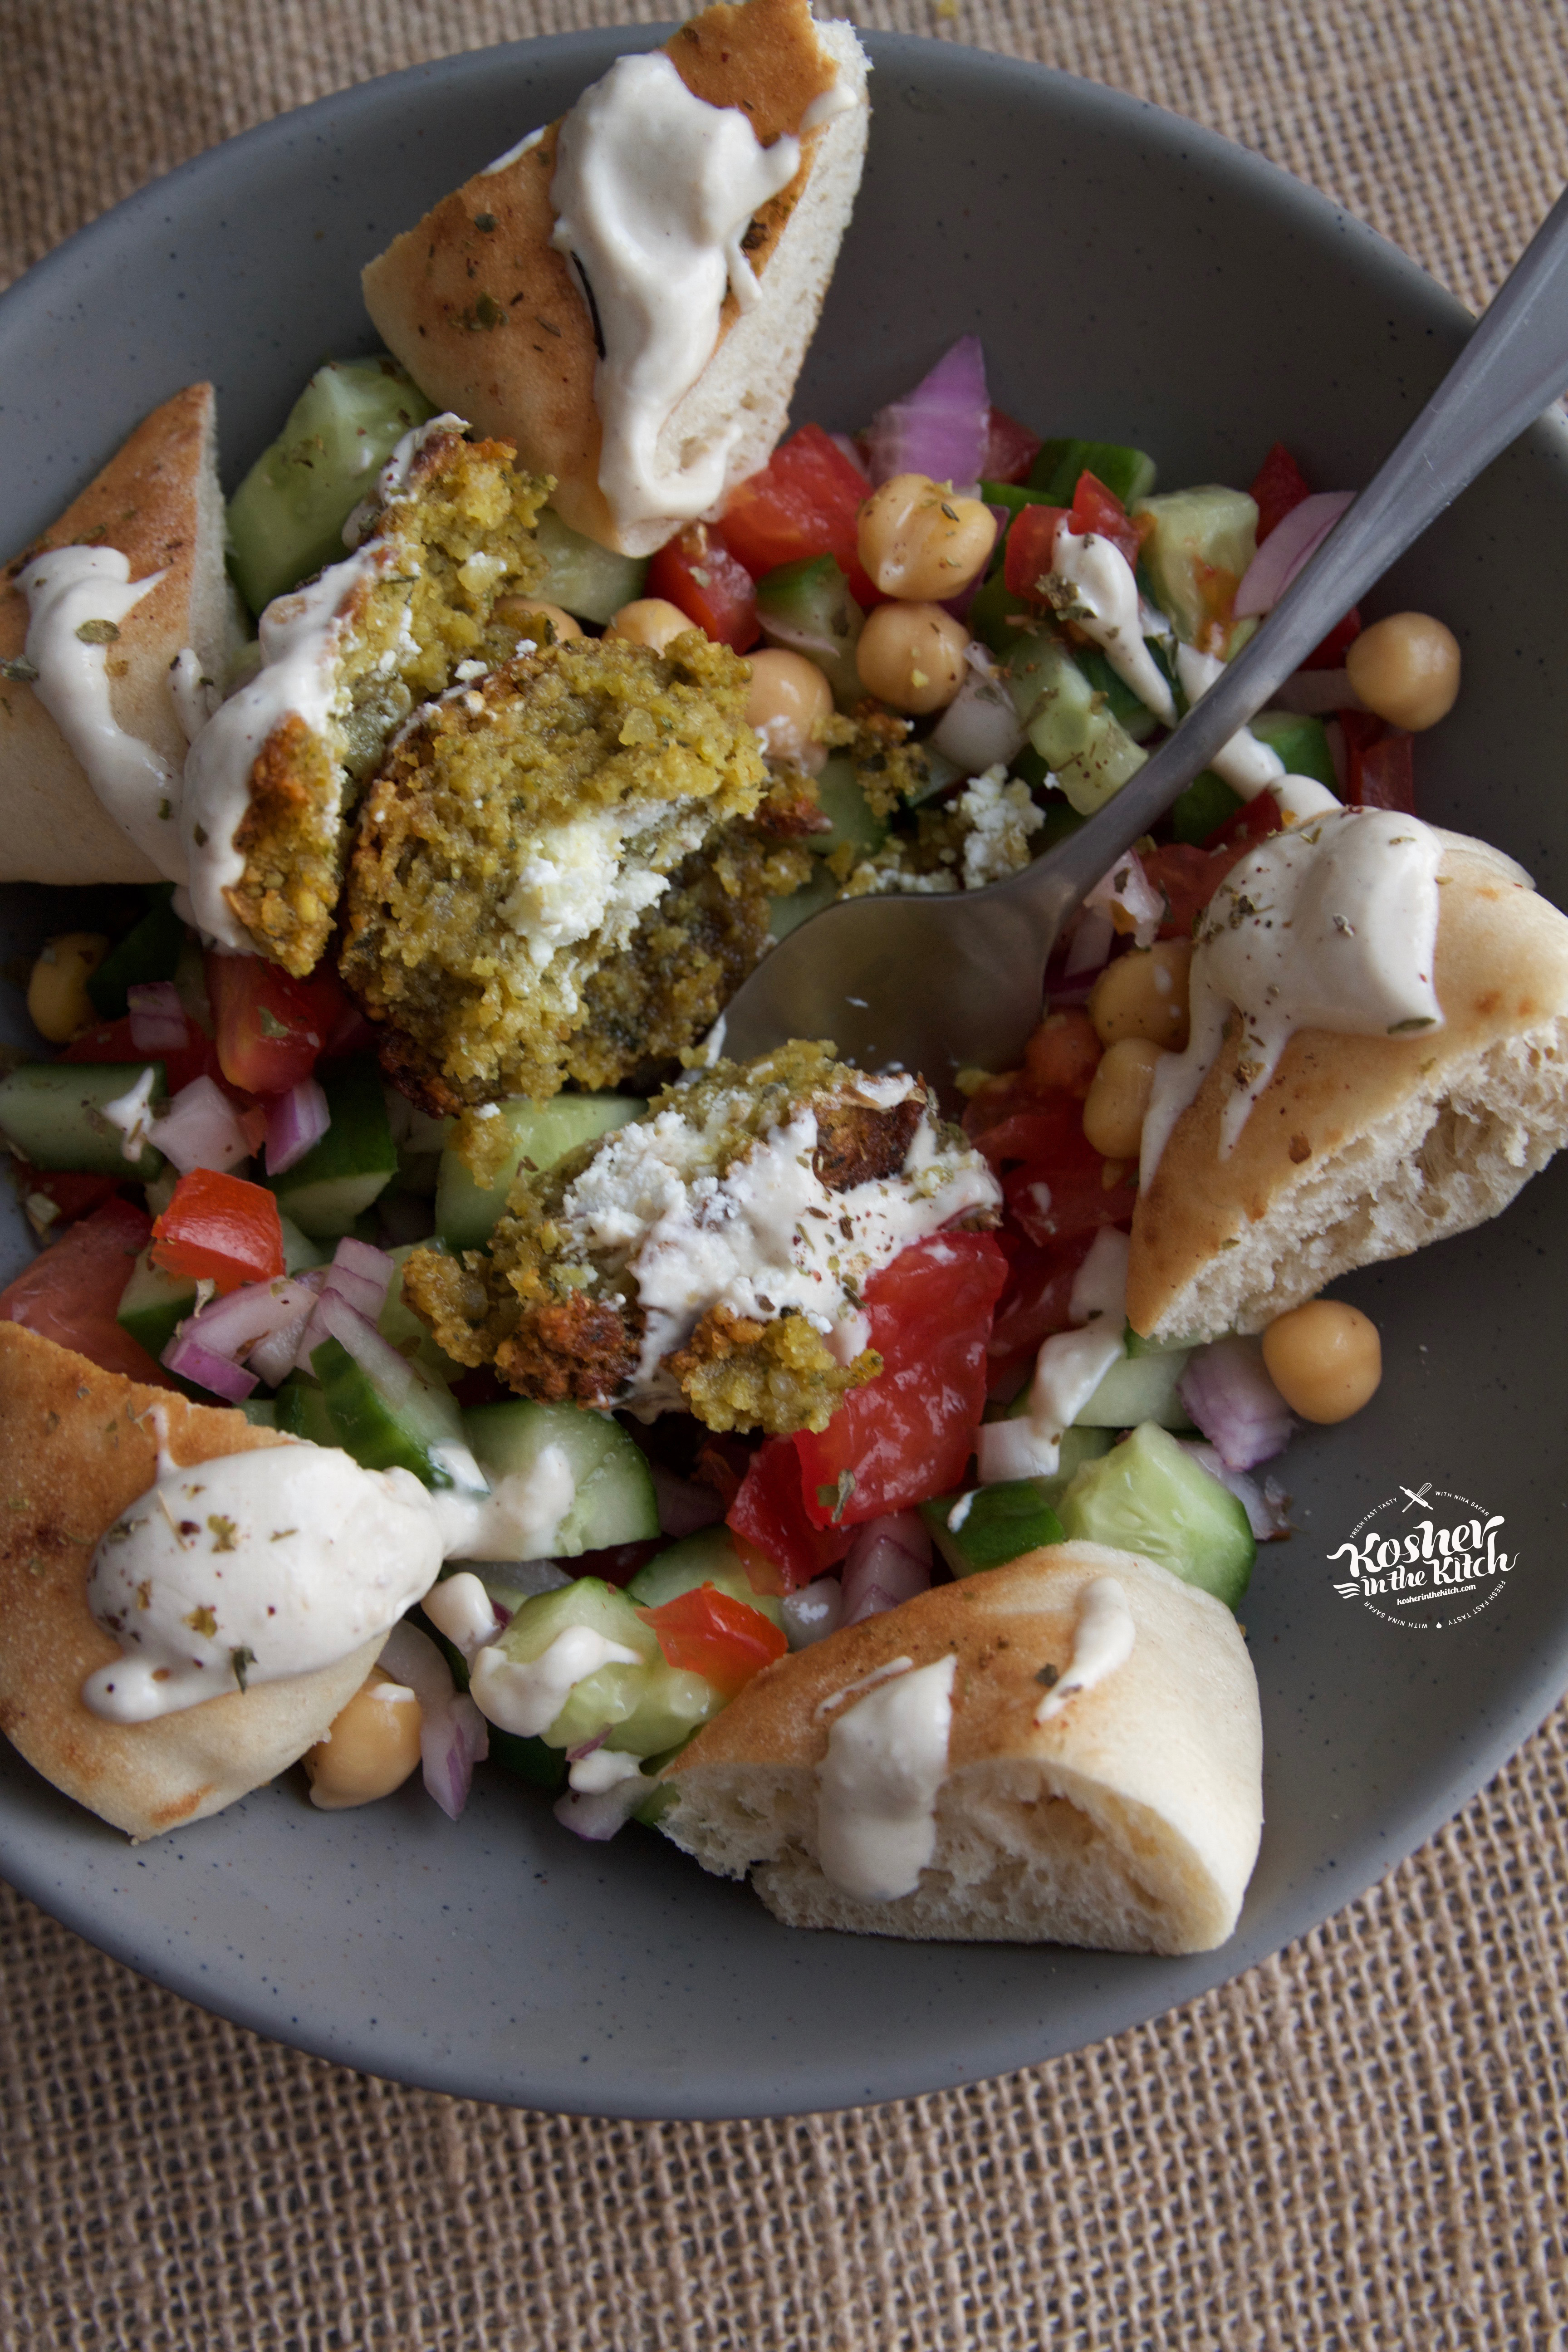 Falafel balls stuffed with goat cheese served over Israeli salad